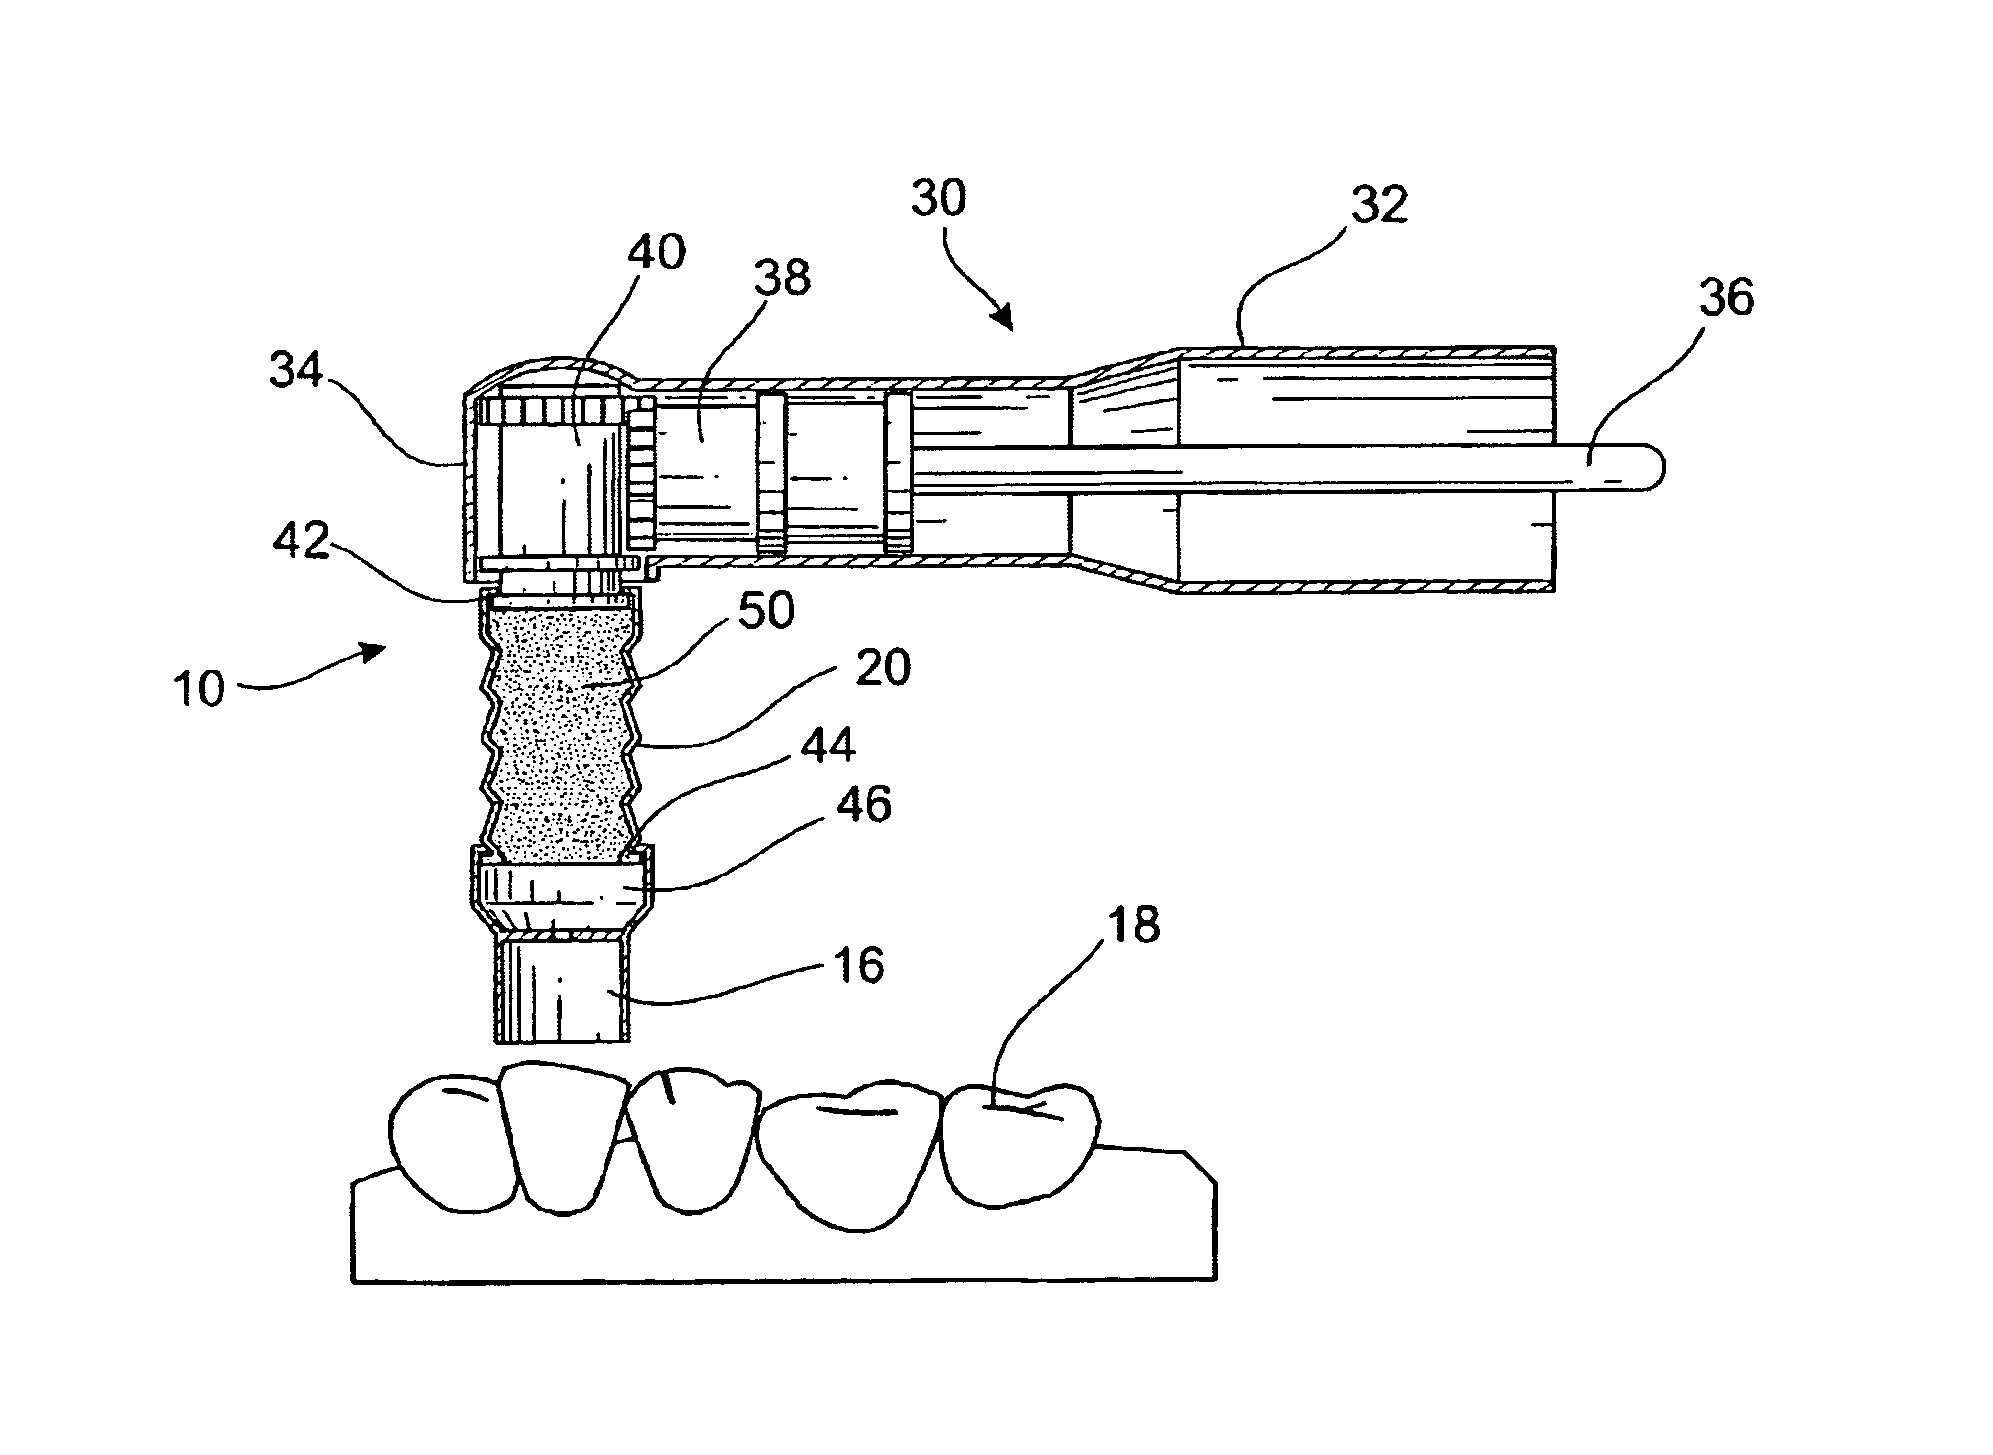 Combination rotating dental cleaning brush and paste device